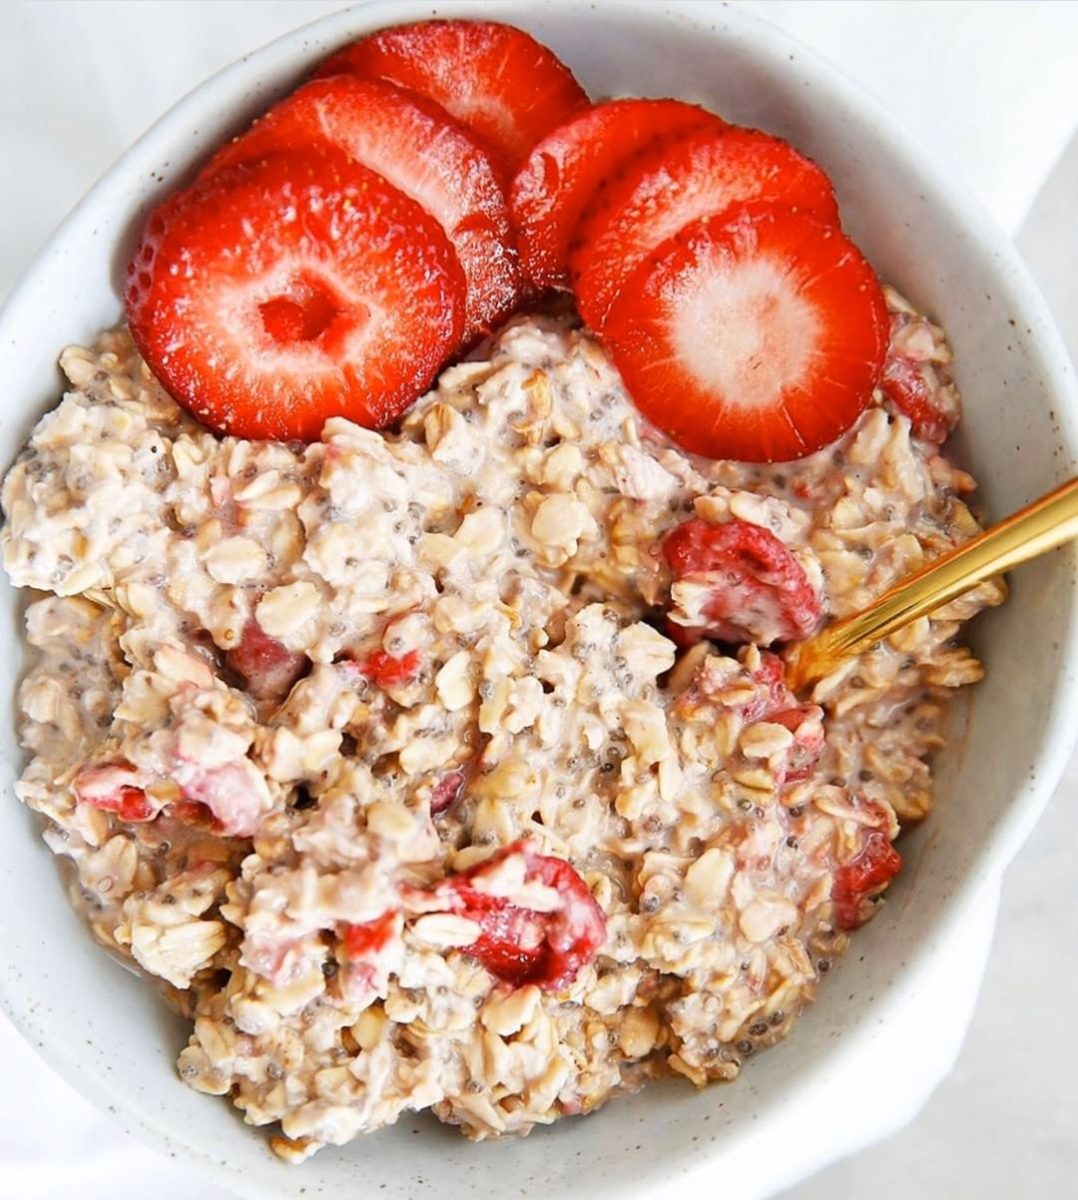 25 make ahead breakfast recipes that will save you time in the morning